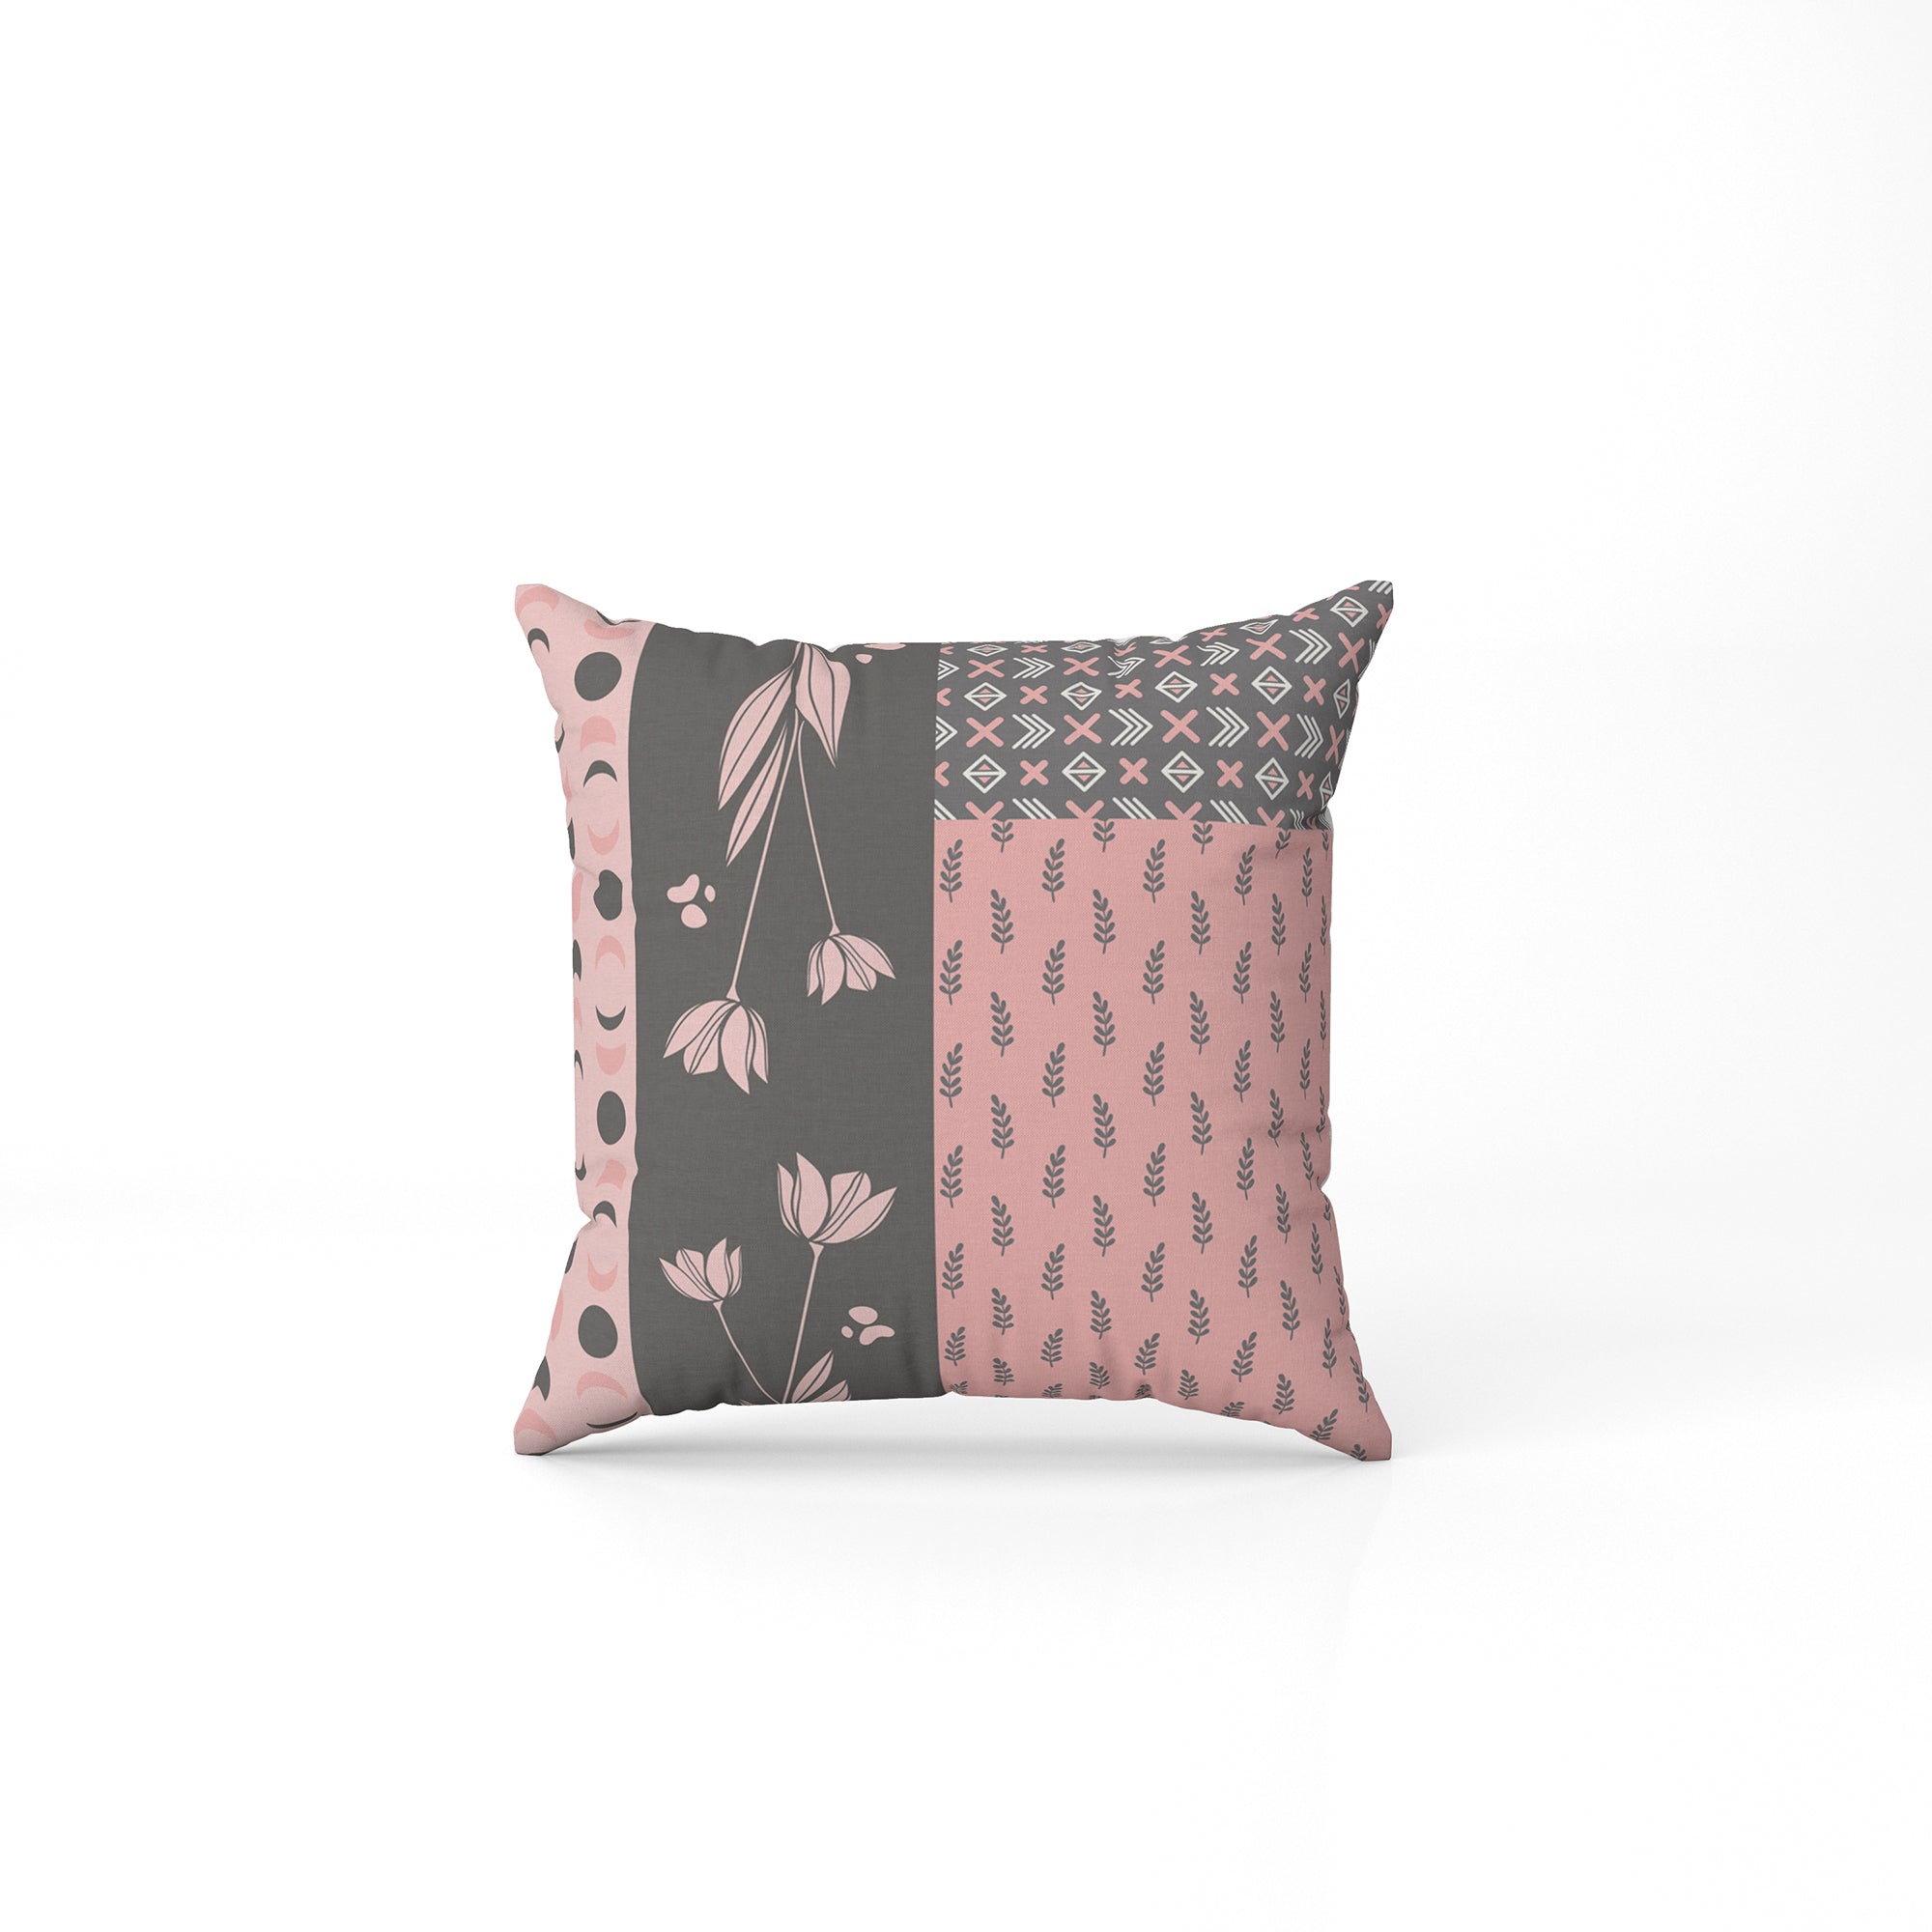 Petals in Gray and Pink Pillow Cover